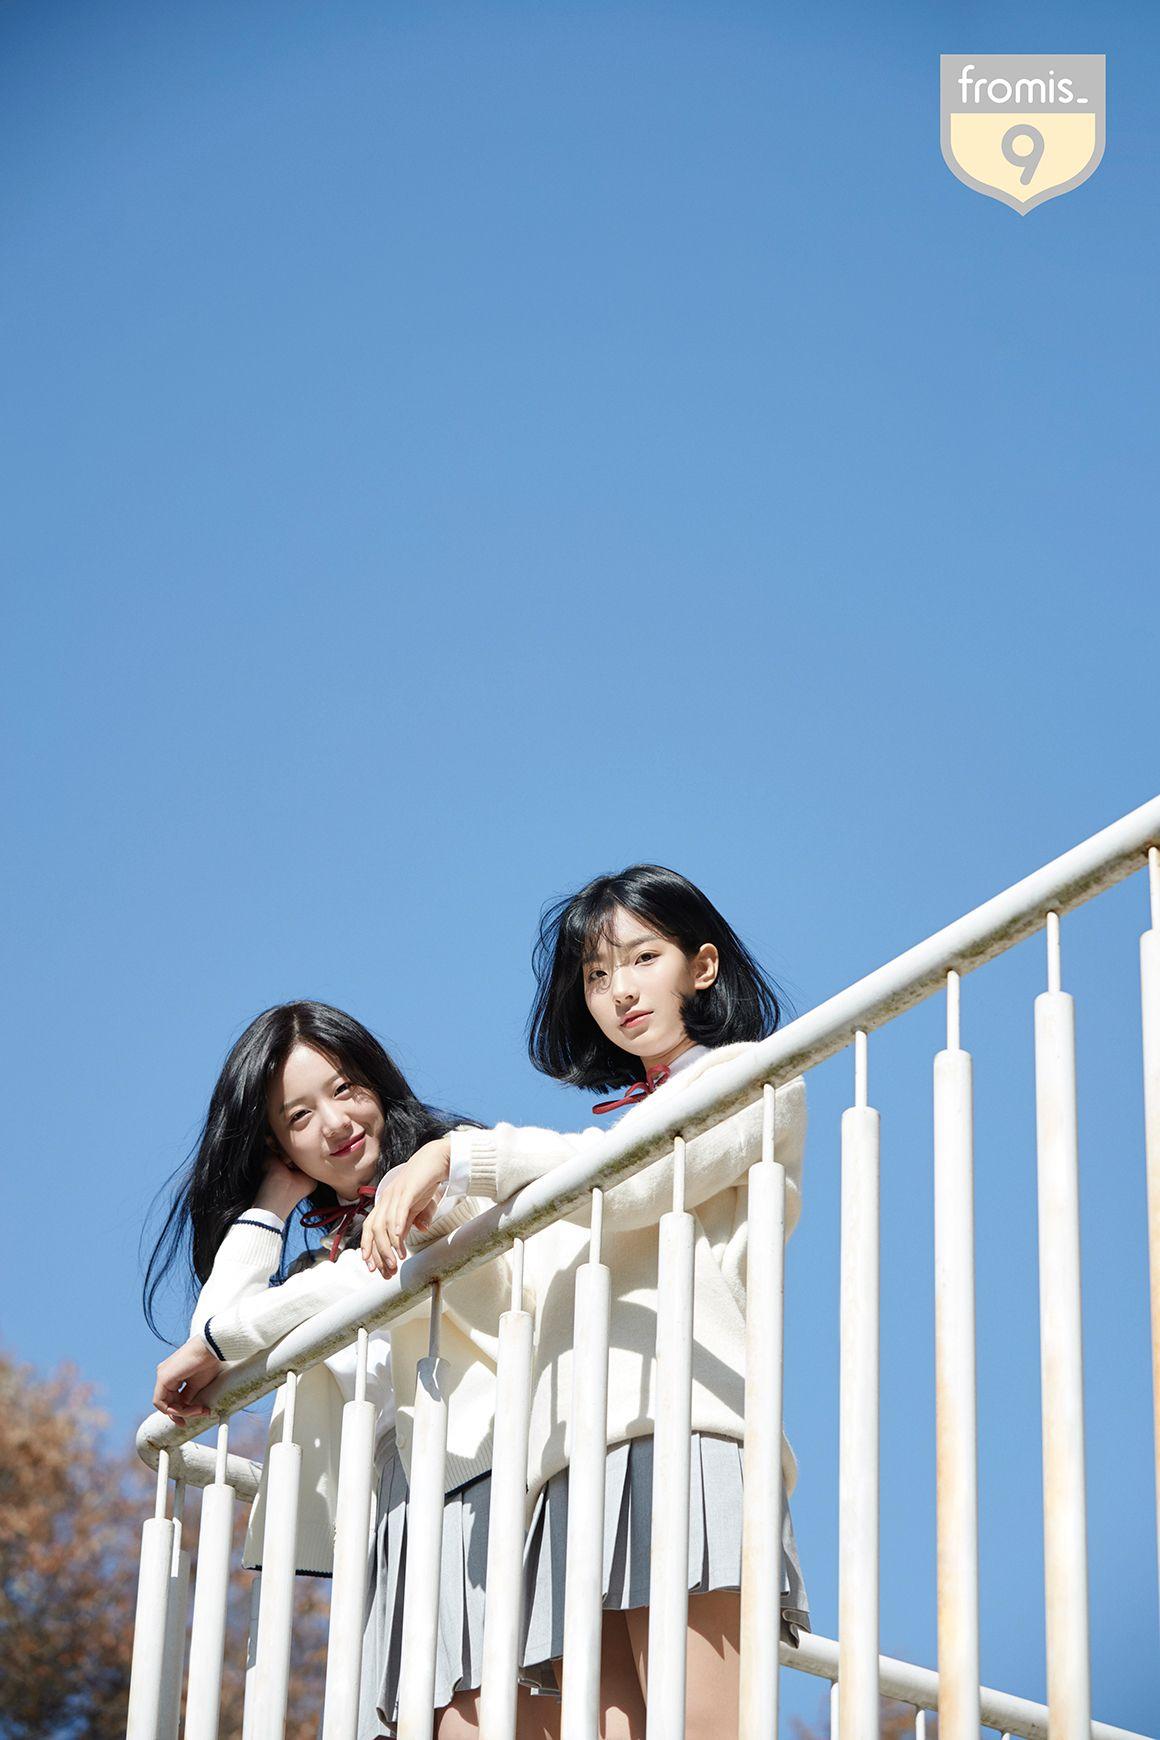 fromis_9 image Gyuri & Saerom HD wallpaper and background photo